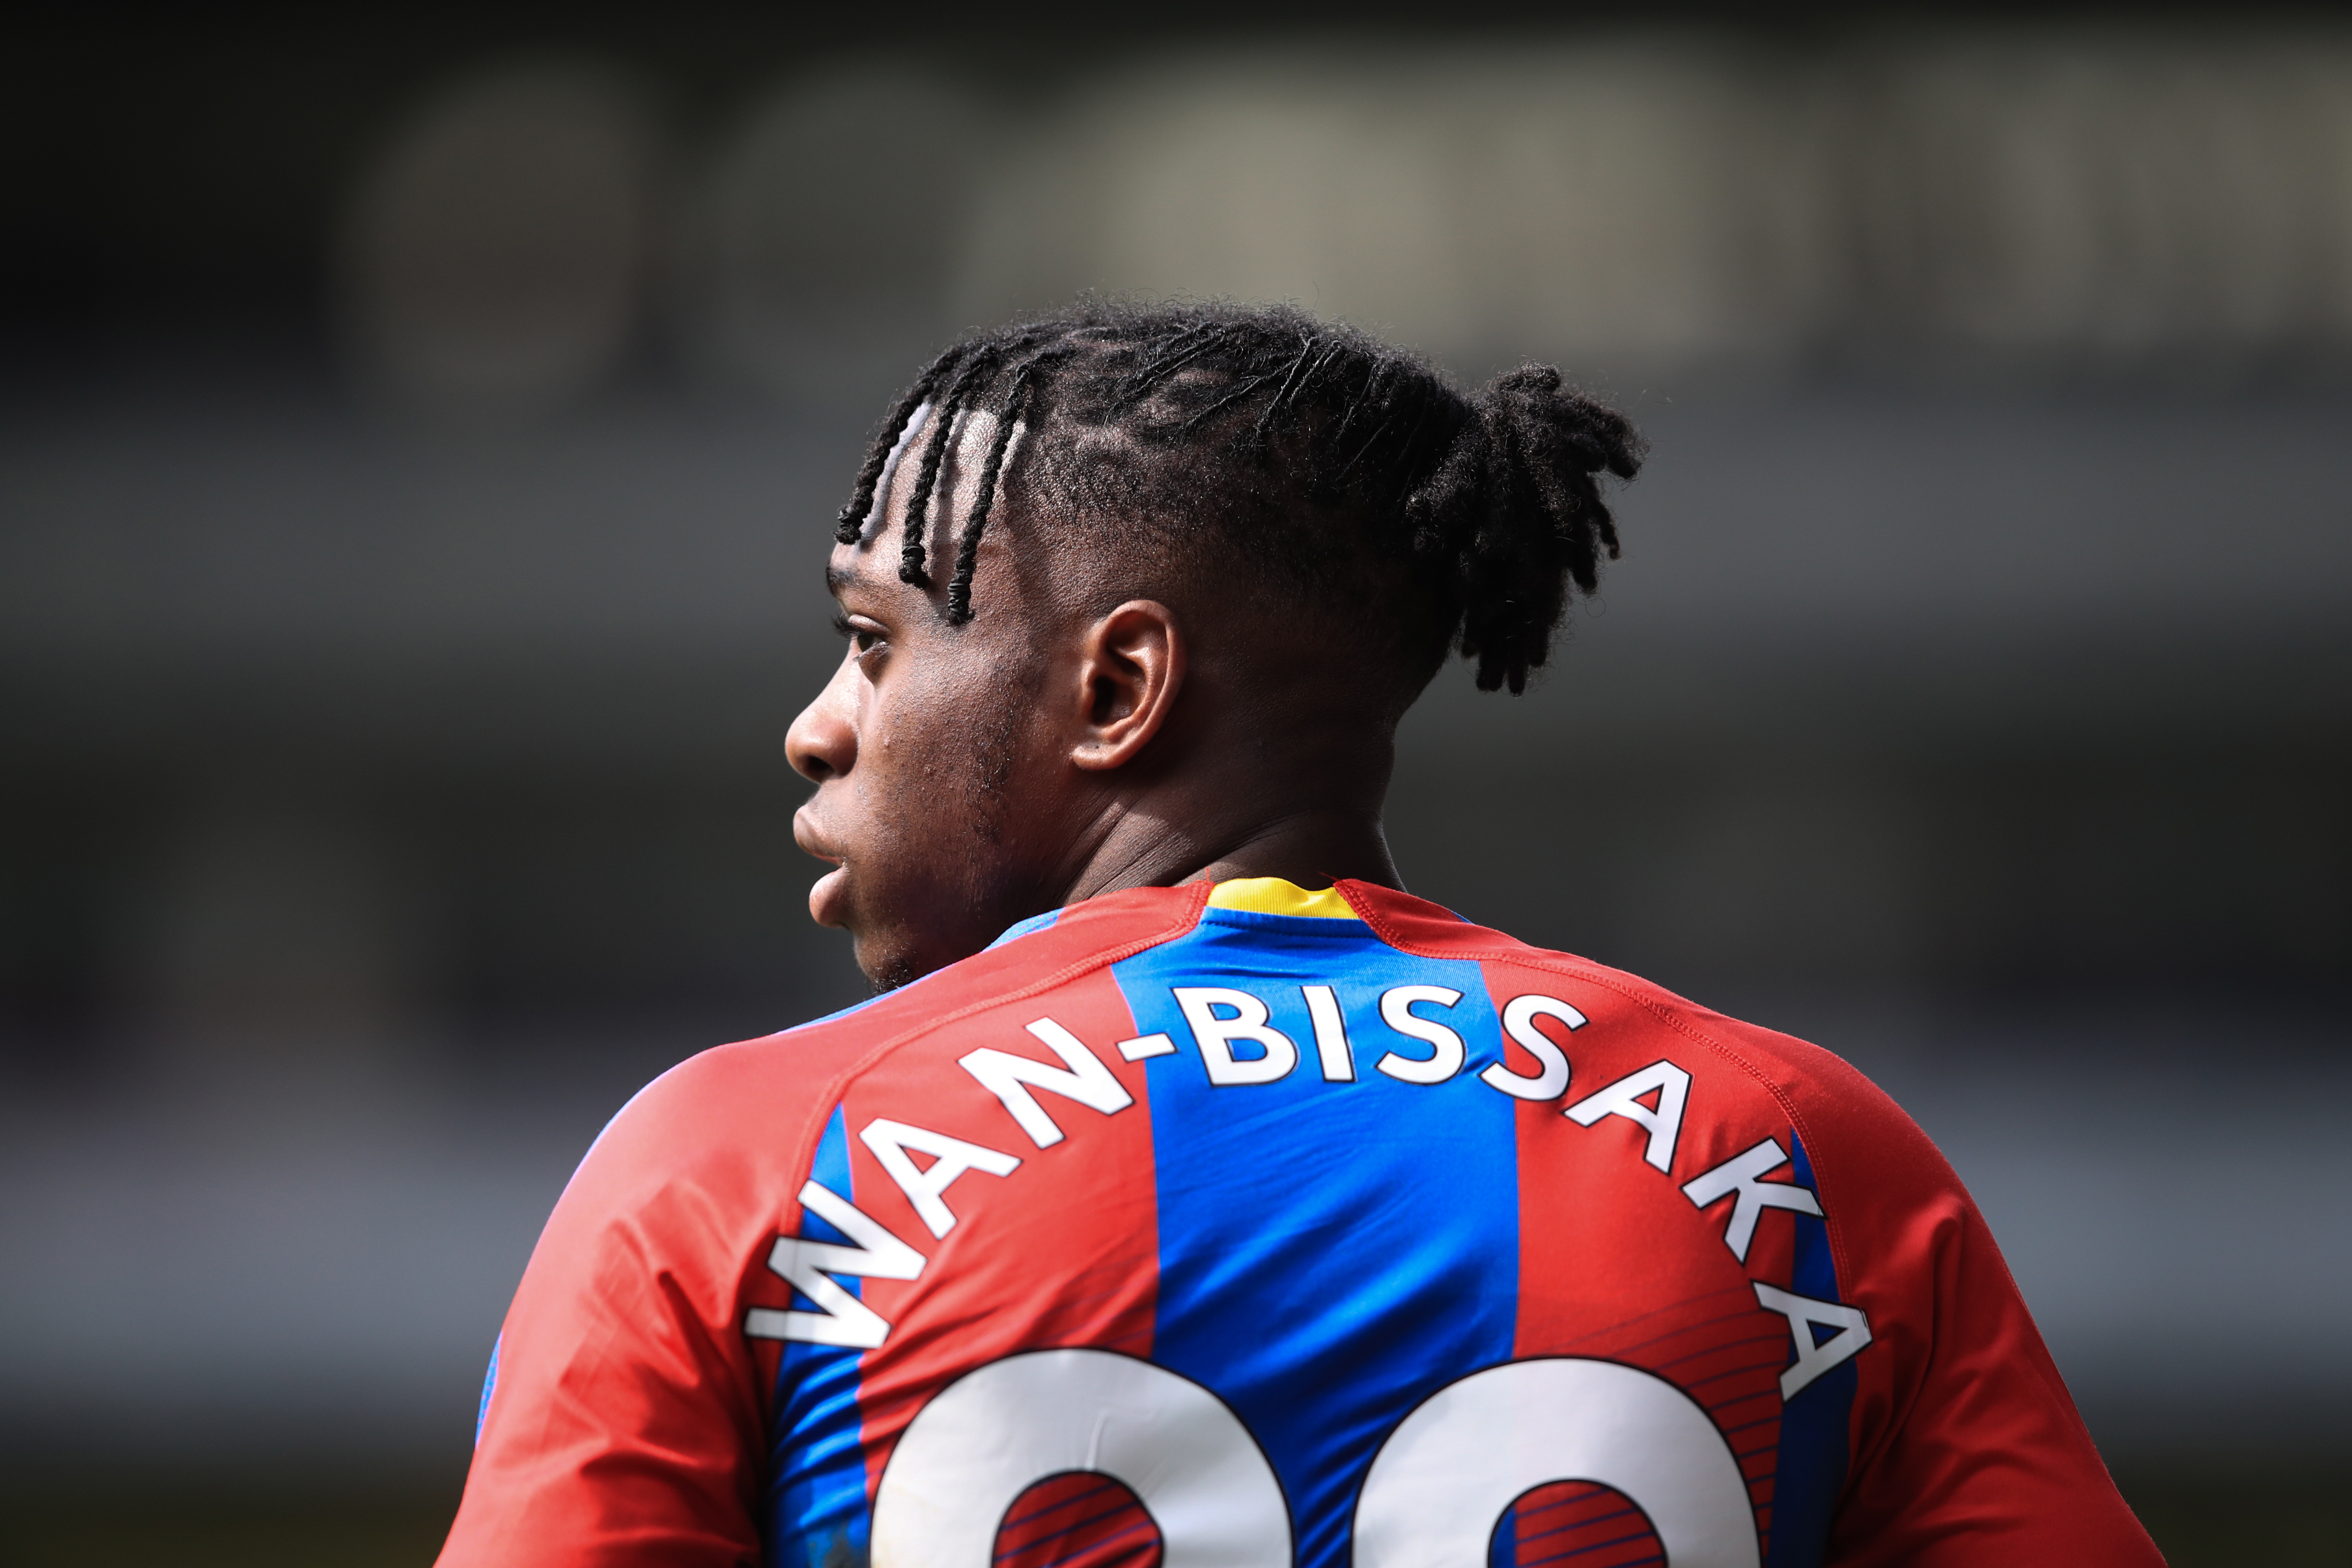 Aaron Wan-Bissaka could become the second first-team signing for Manchester United under Ole Gunnar Solskjaer. (Picture Courtesy - AFP/Getty Images)